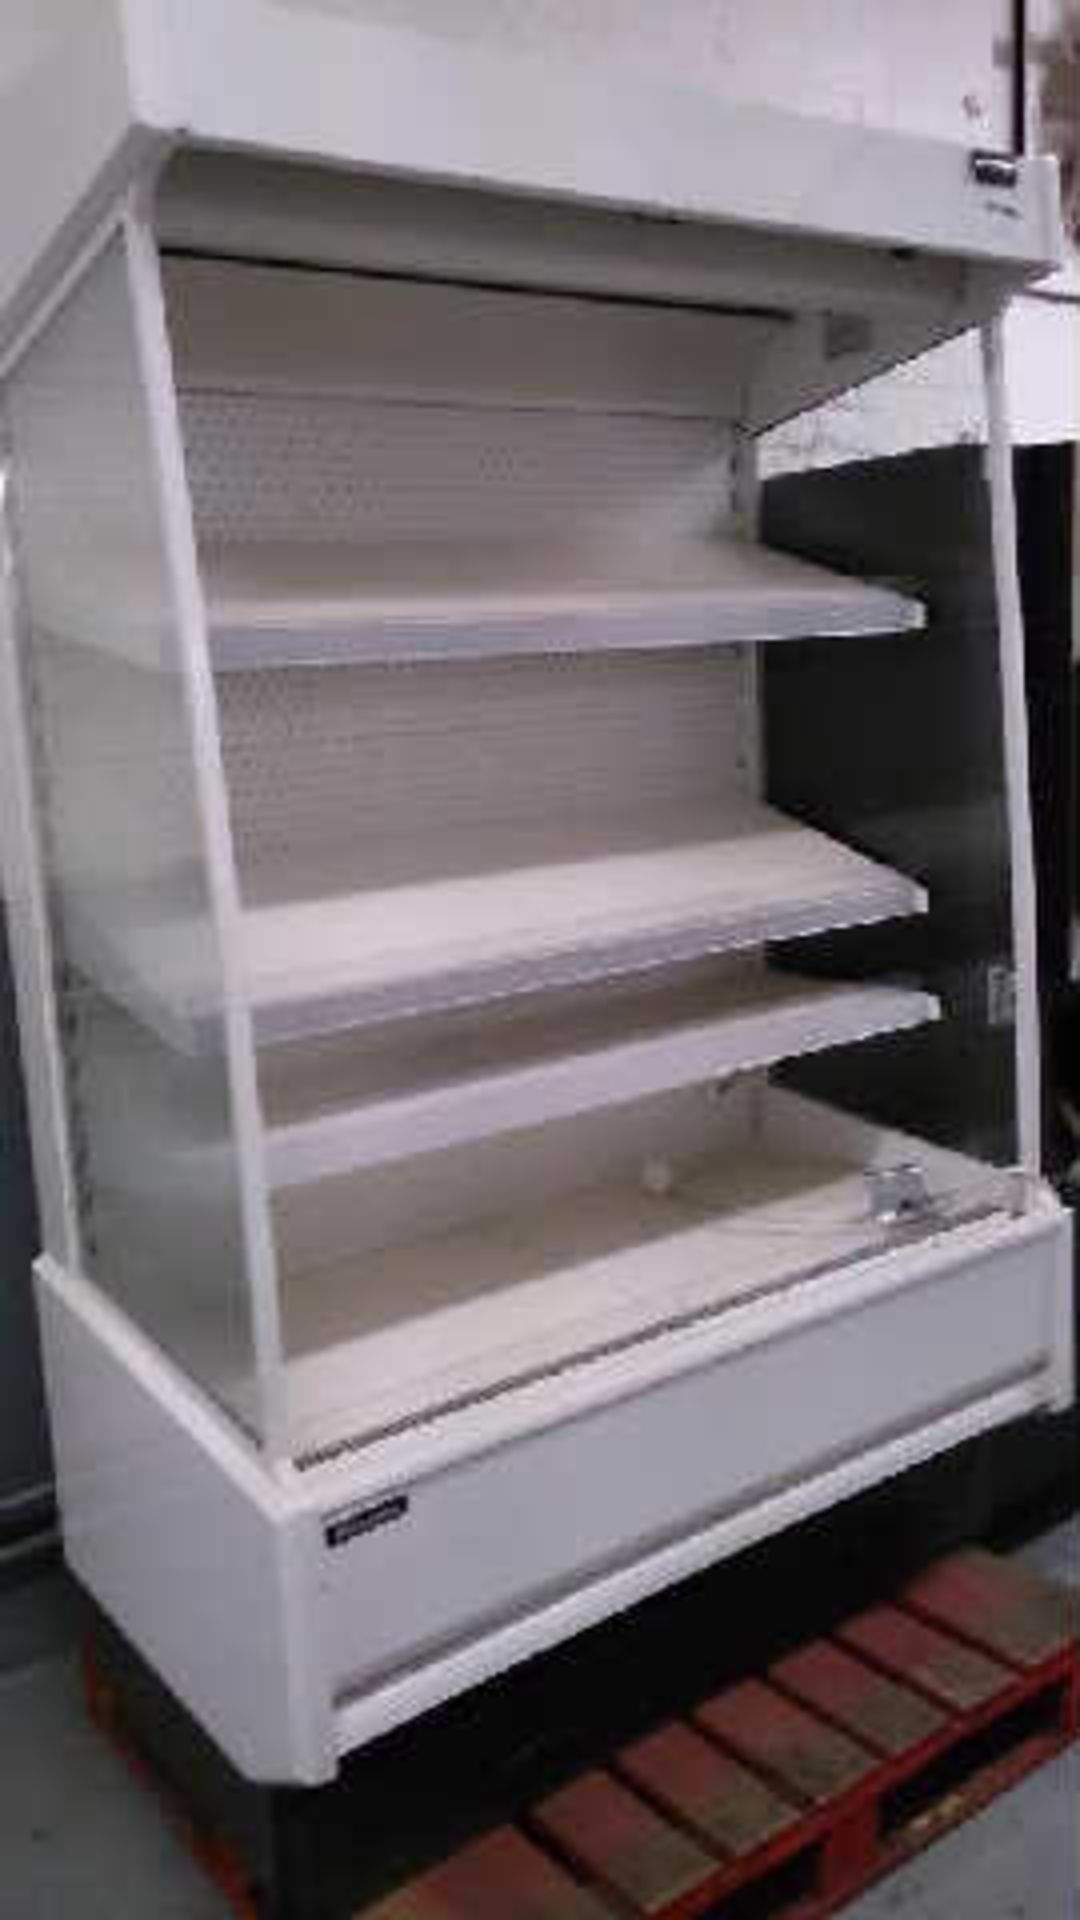 BLIZZARD LARGE REFRIGERATED DISPLAY UNIT